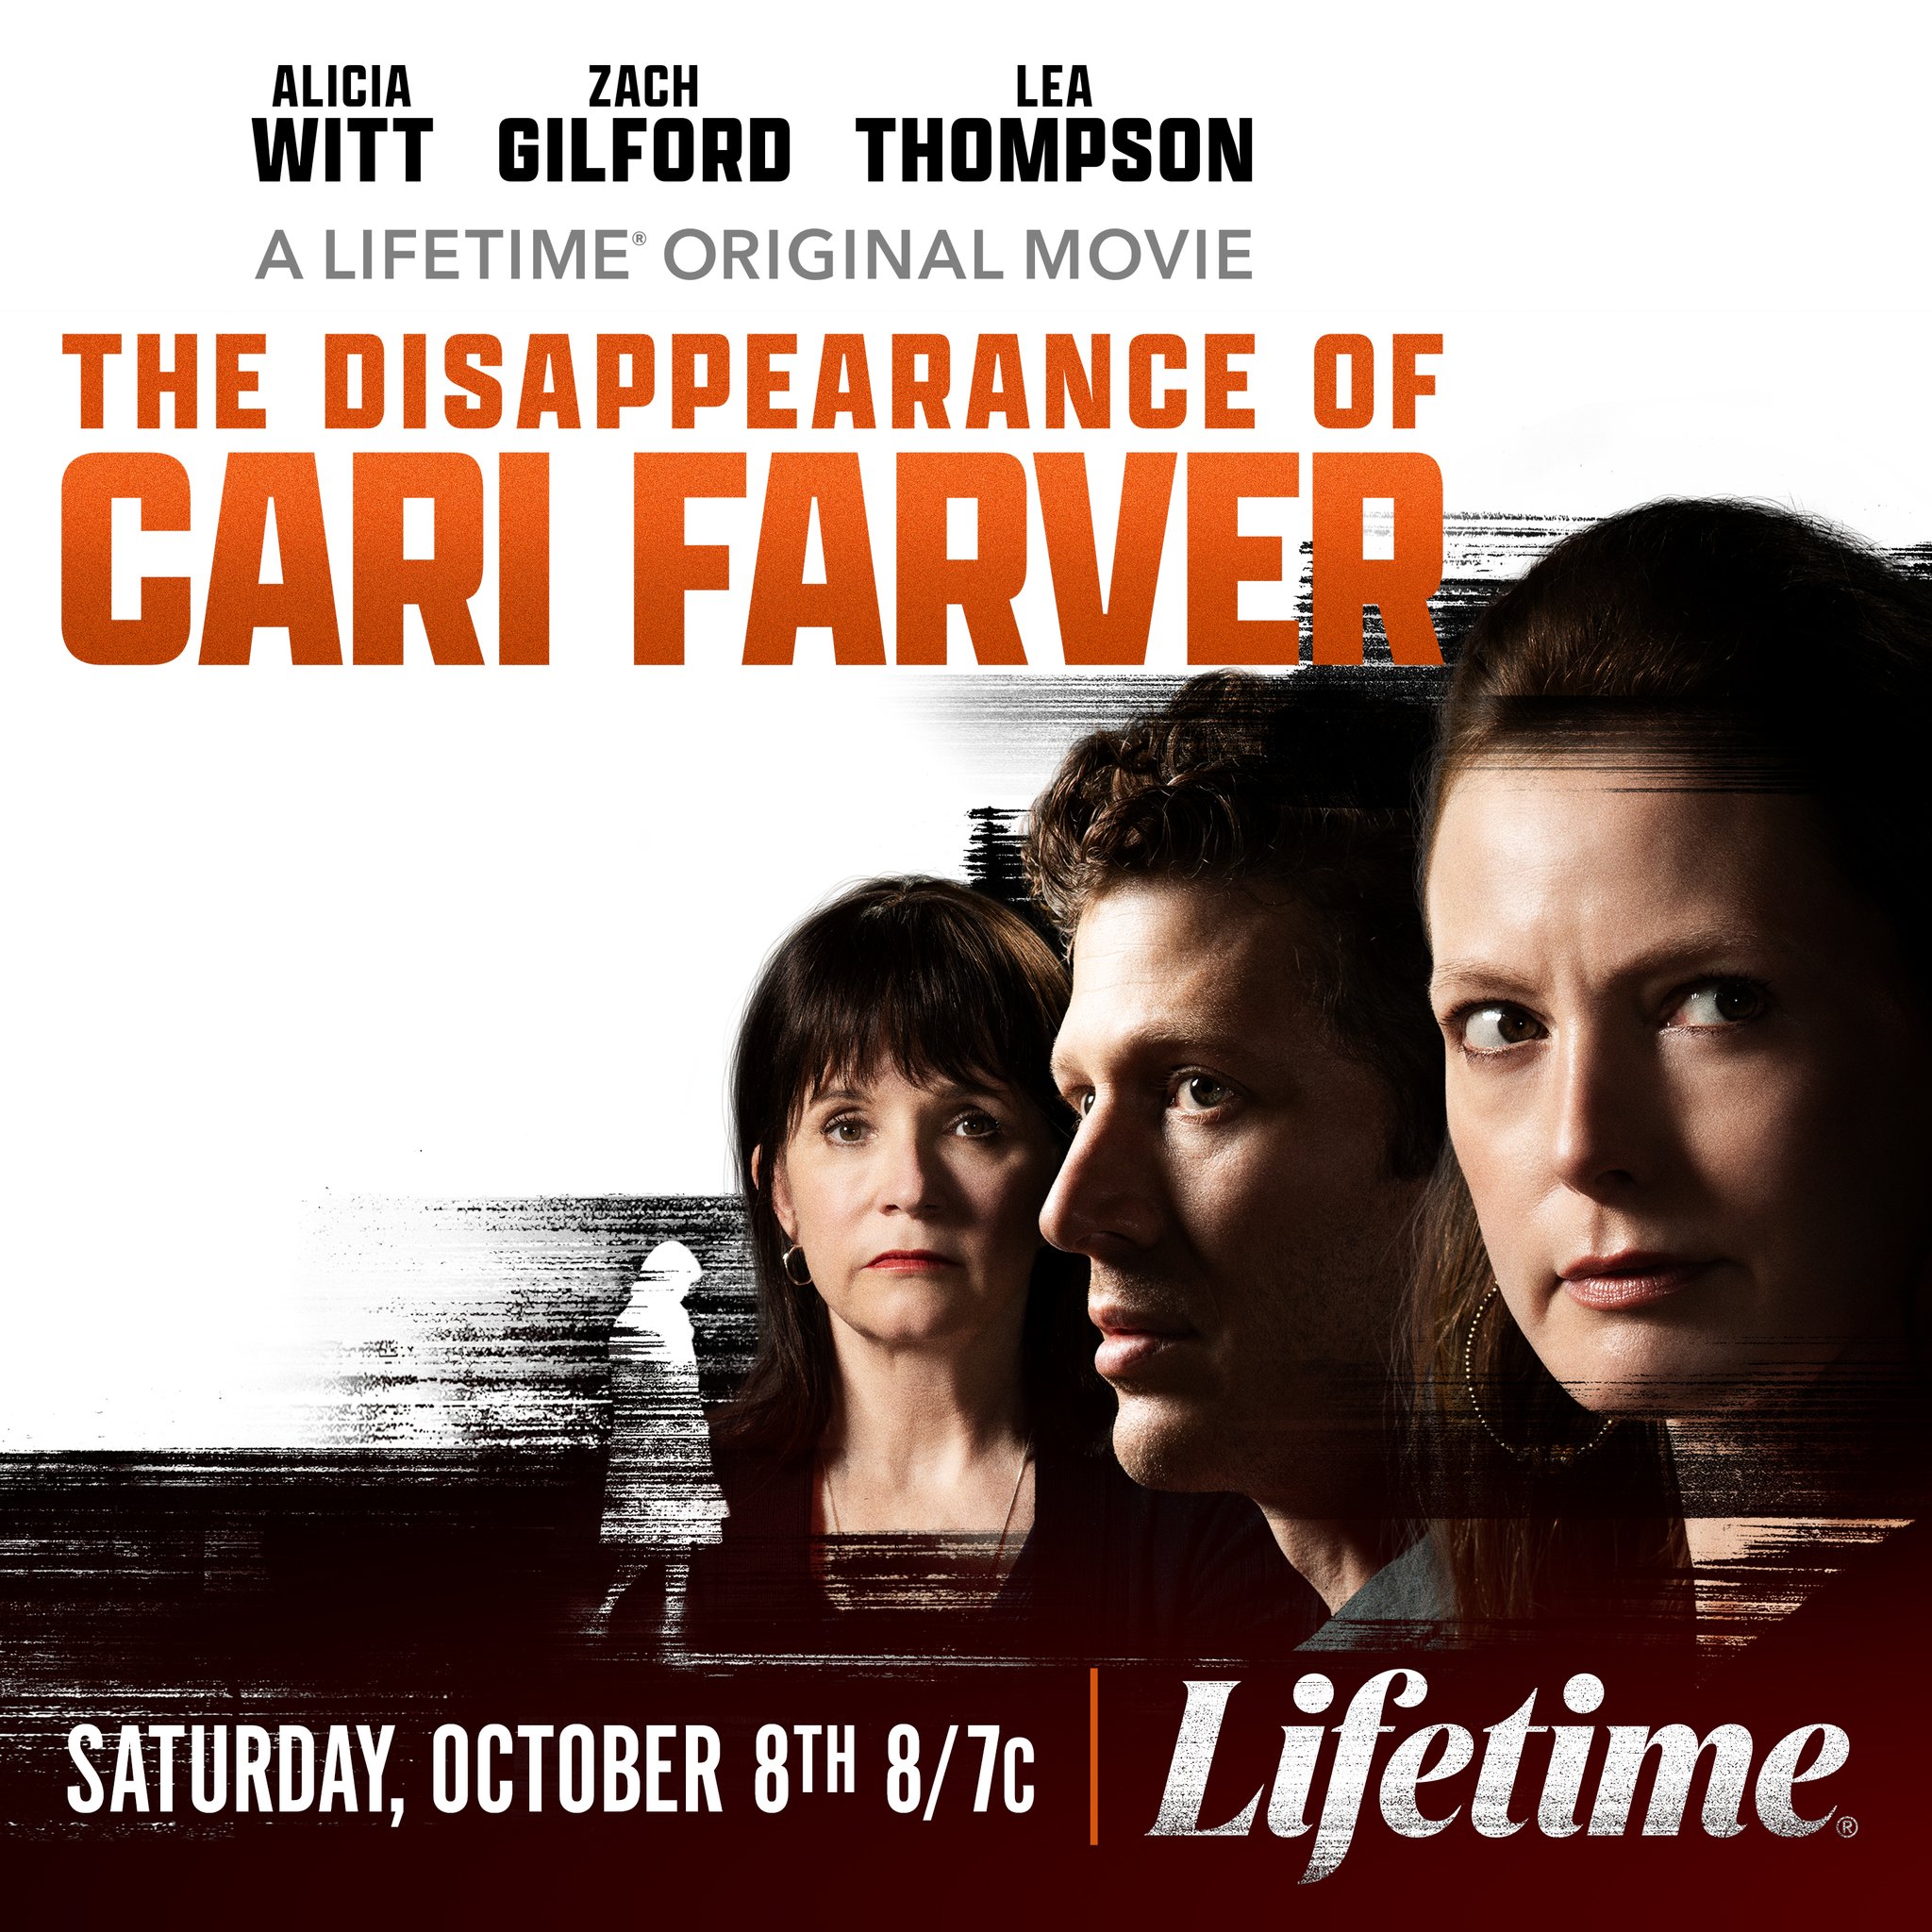 The Disappearance of Cari Farver